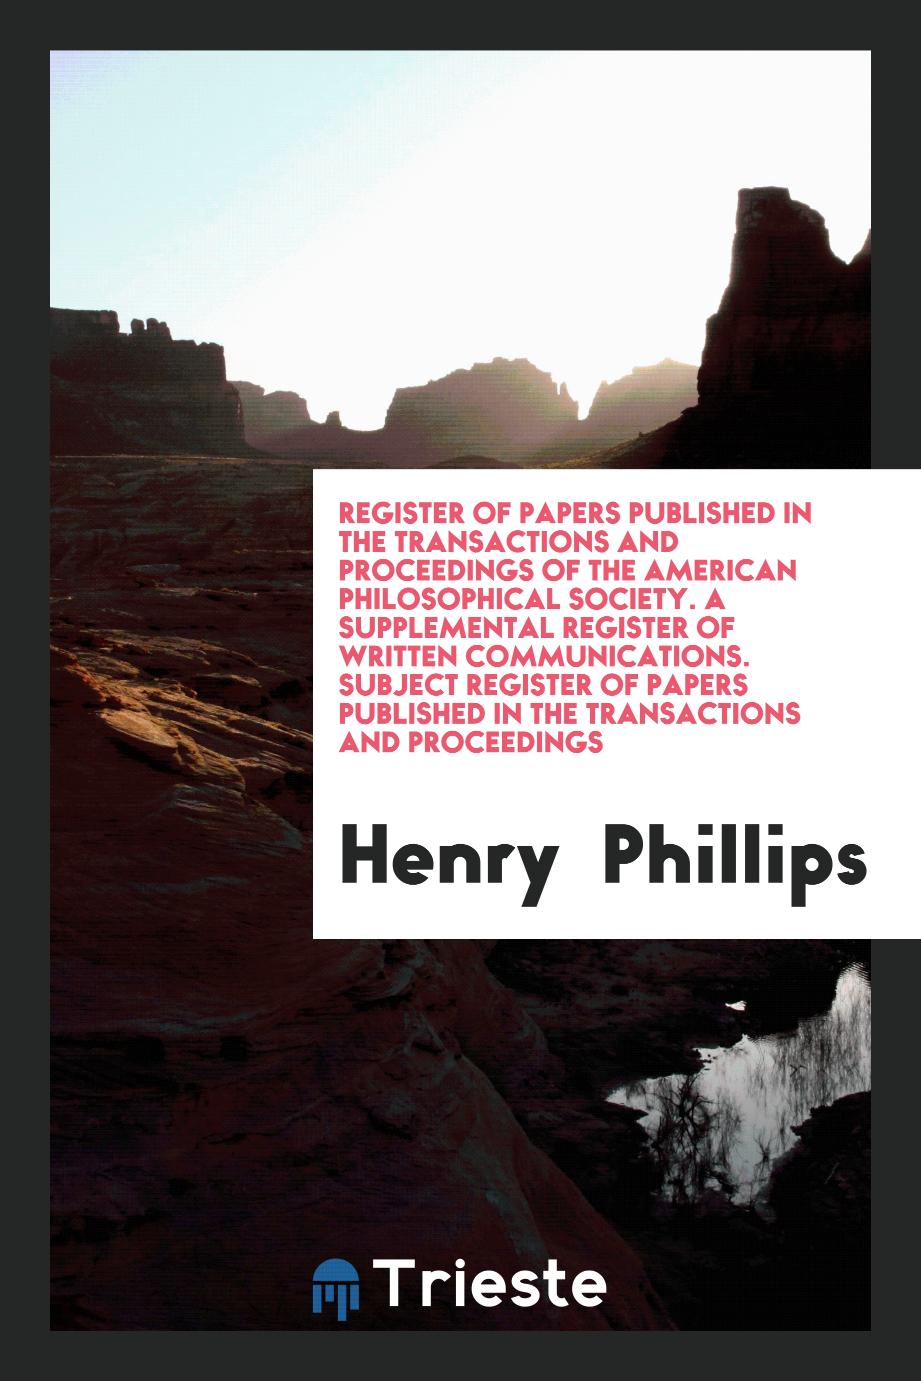 Register of Papers Published in the Transactions and Proceedings of the American Philosophical Society. A Supplemental Register of Written Communications. Subject Register of Papers Published in the Transactions and Proceedings